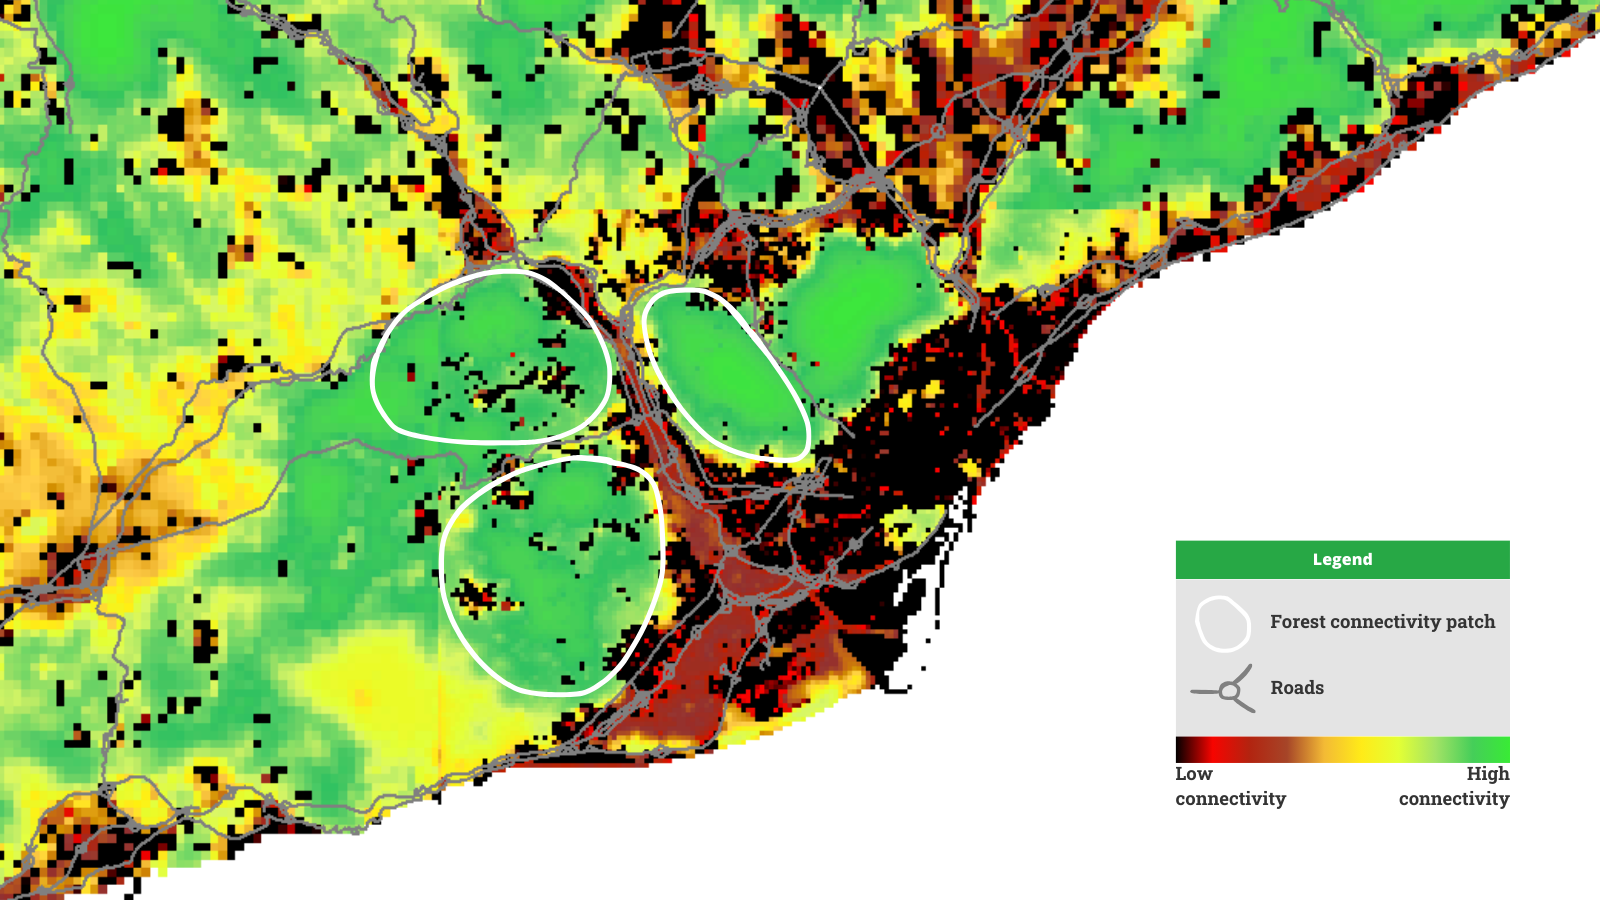 Example of connectivity map in the area of Barcelona. Image generated using MiraMon.